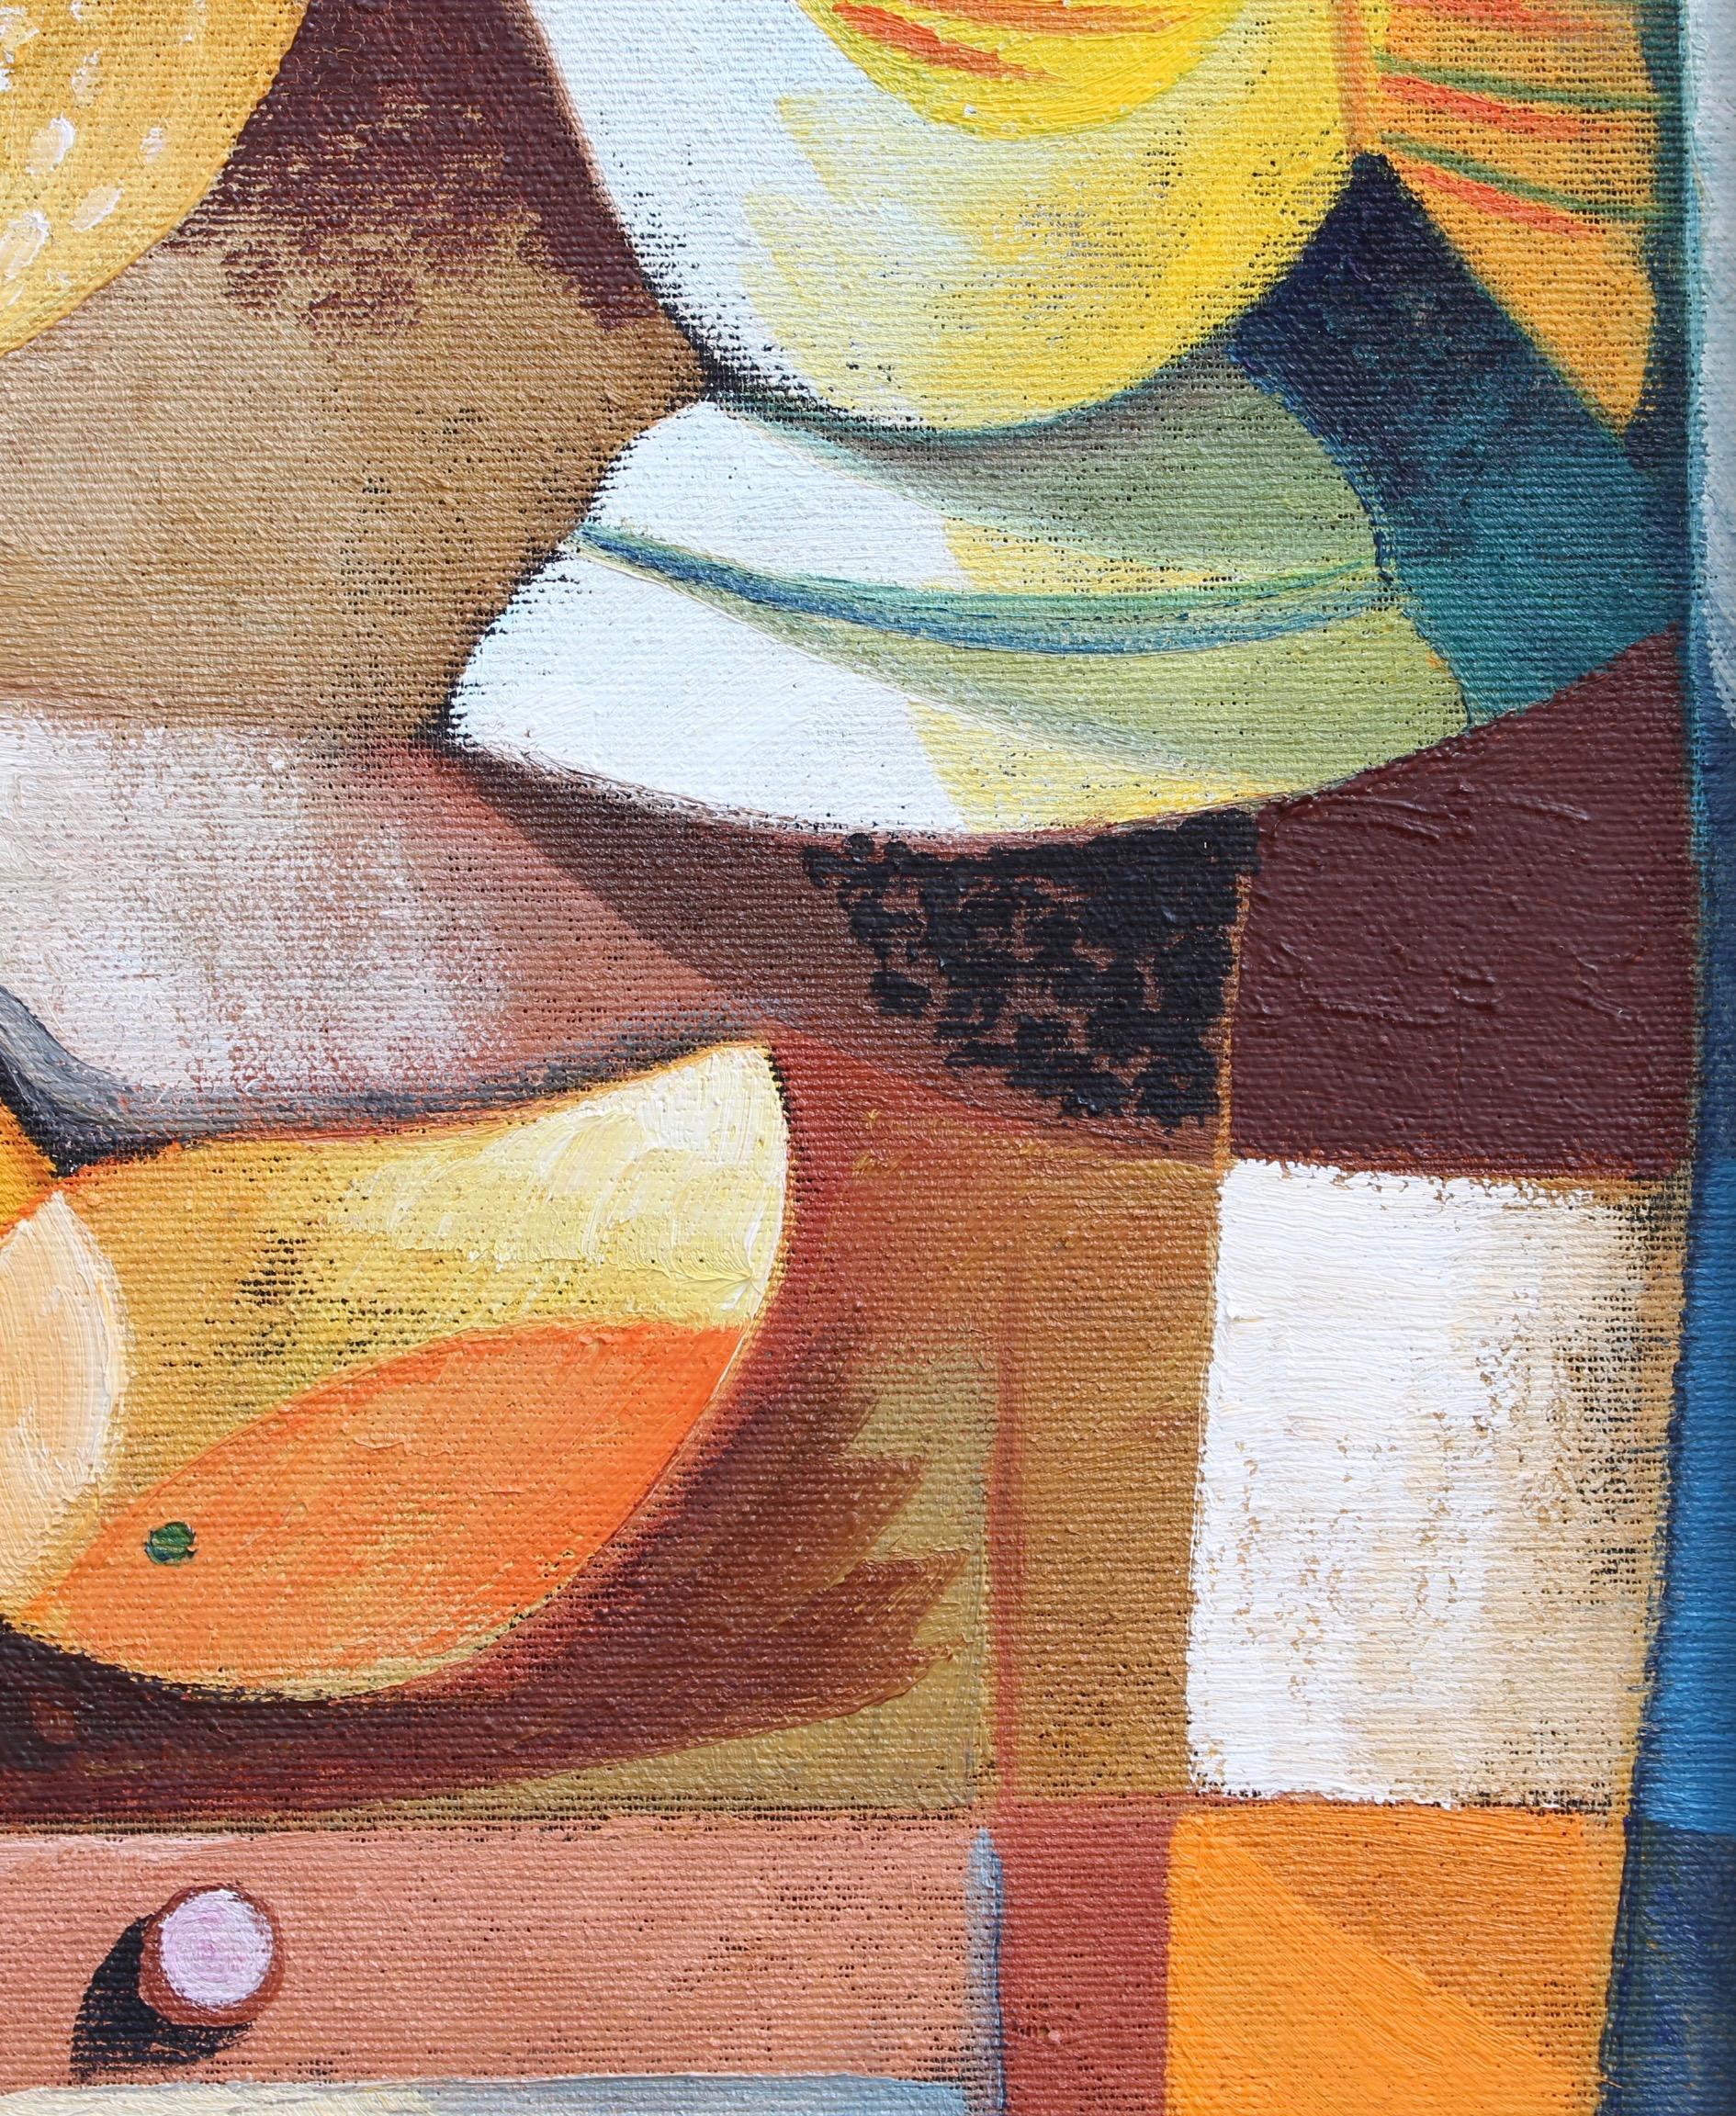 'Still Life on Table', oil on board, by Vittorio Maria Di Carlo (circa 1970s). A delightful and colourful work of art inspired by the works of Juan Gris and Pablo Picasso. Like Gris, Di Carlo depicts the stuff of everyday life: a bottle, a ceramic